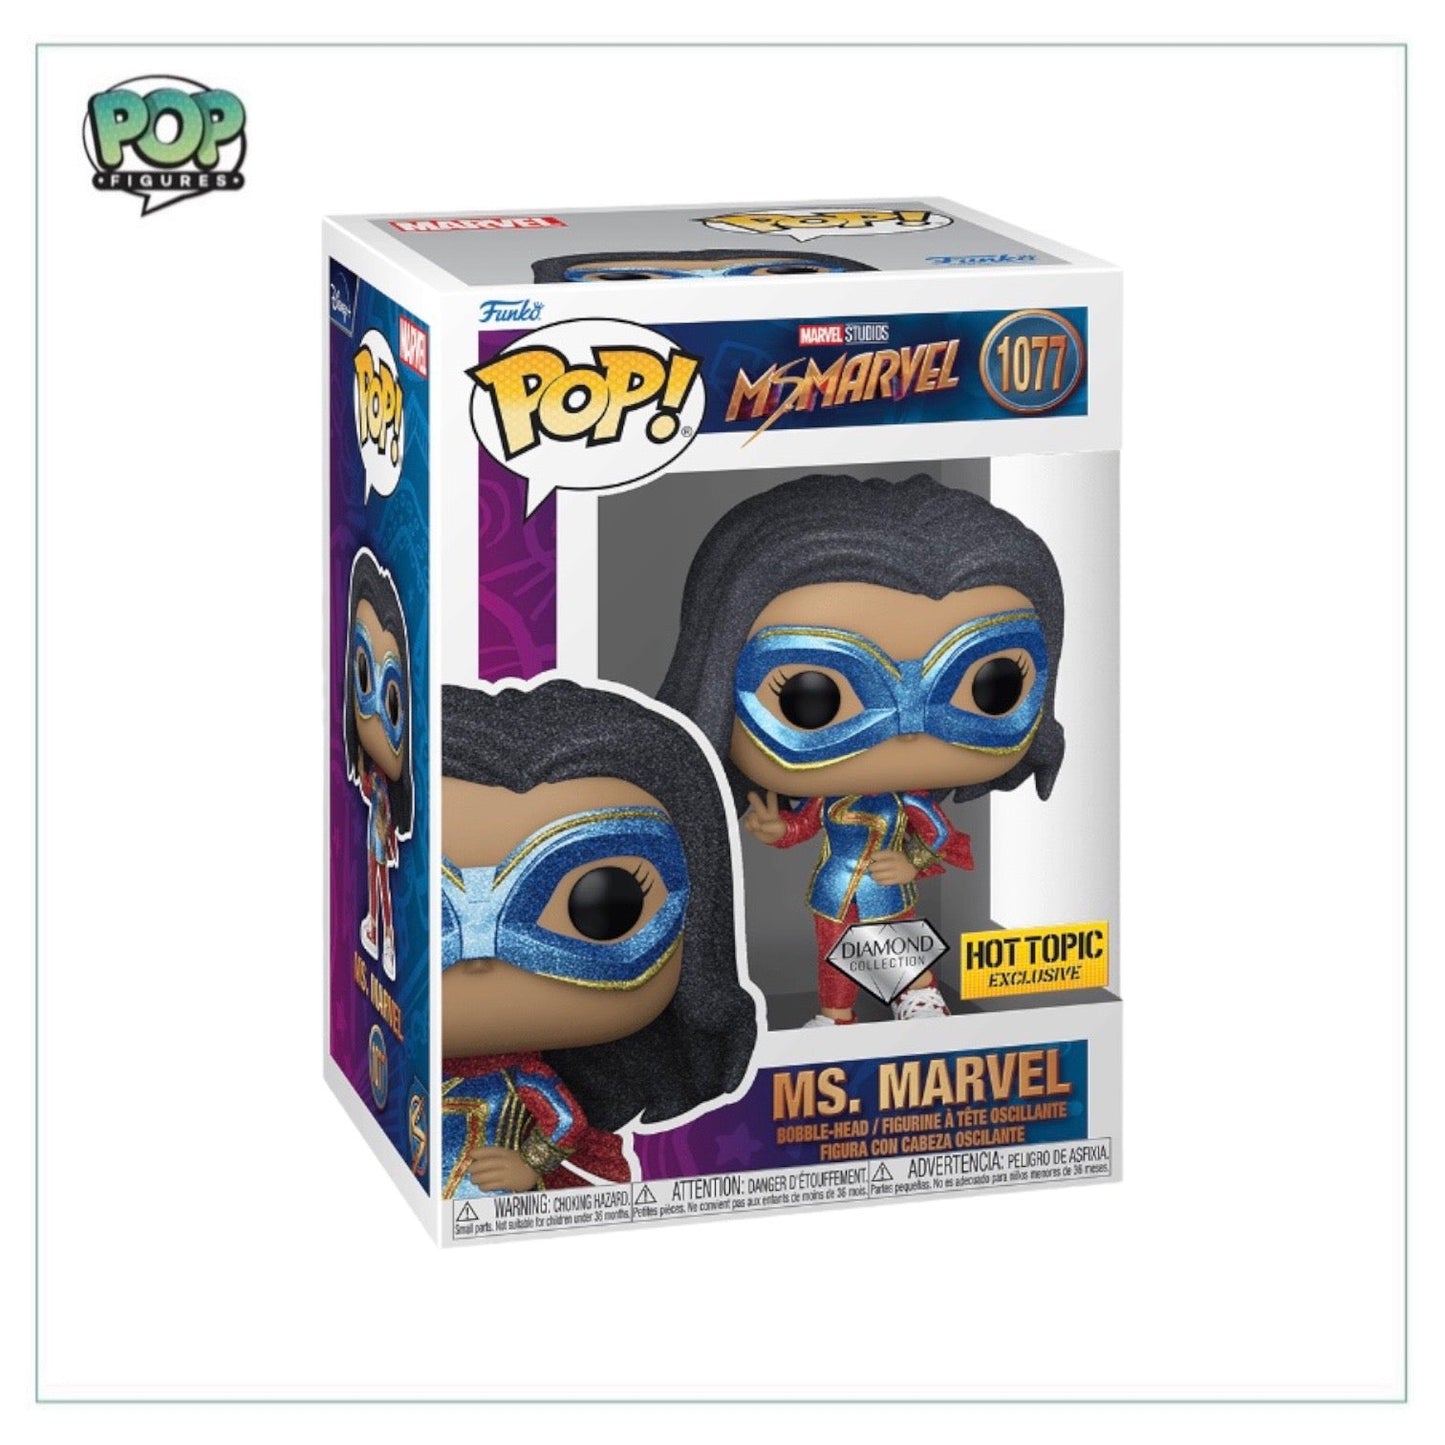 Ms. Marvel #1077 (Diamond Collection) Funko Pop! - Ms. Marvel - Hot Topic Exclusive - Angry Cat